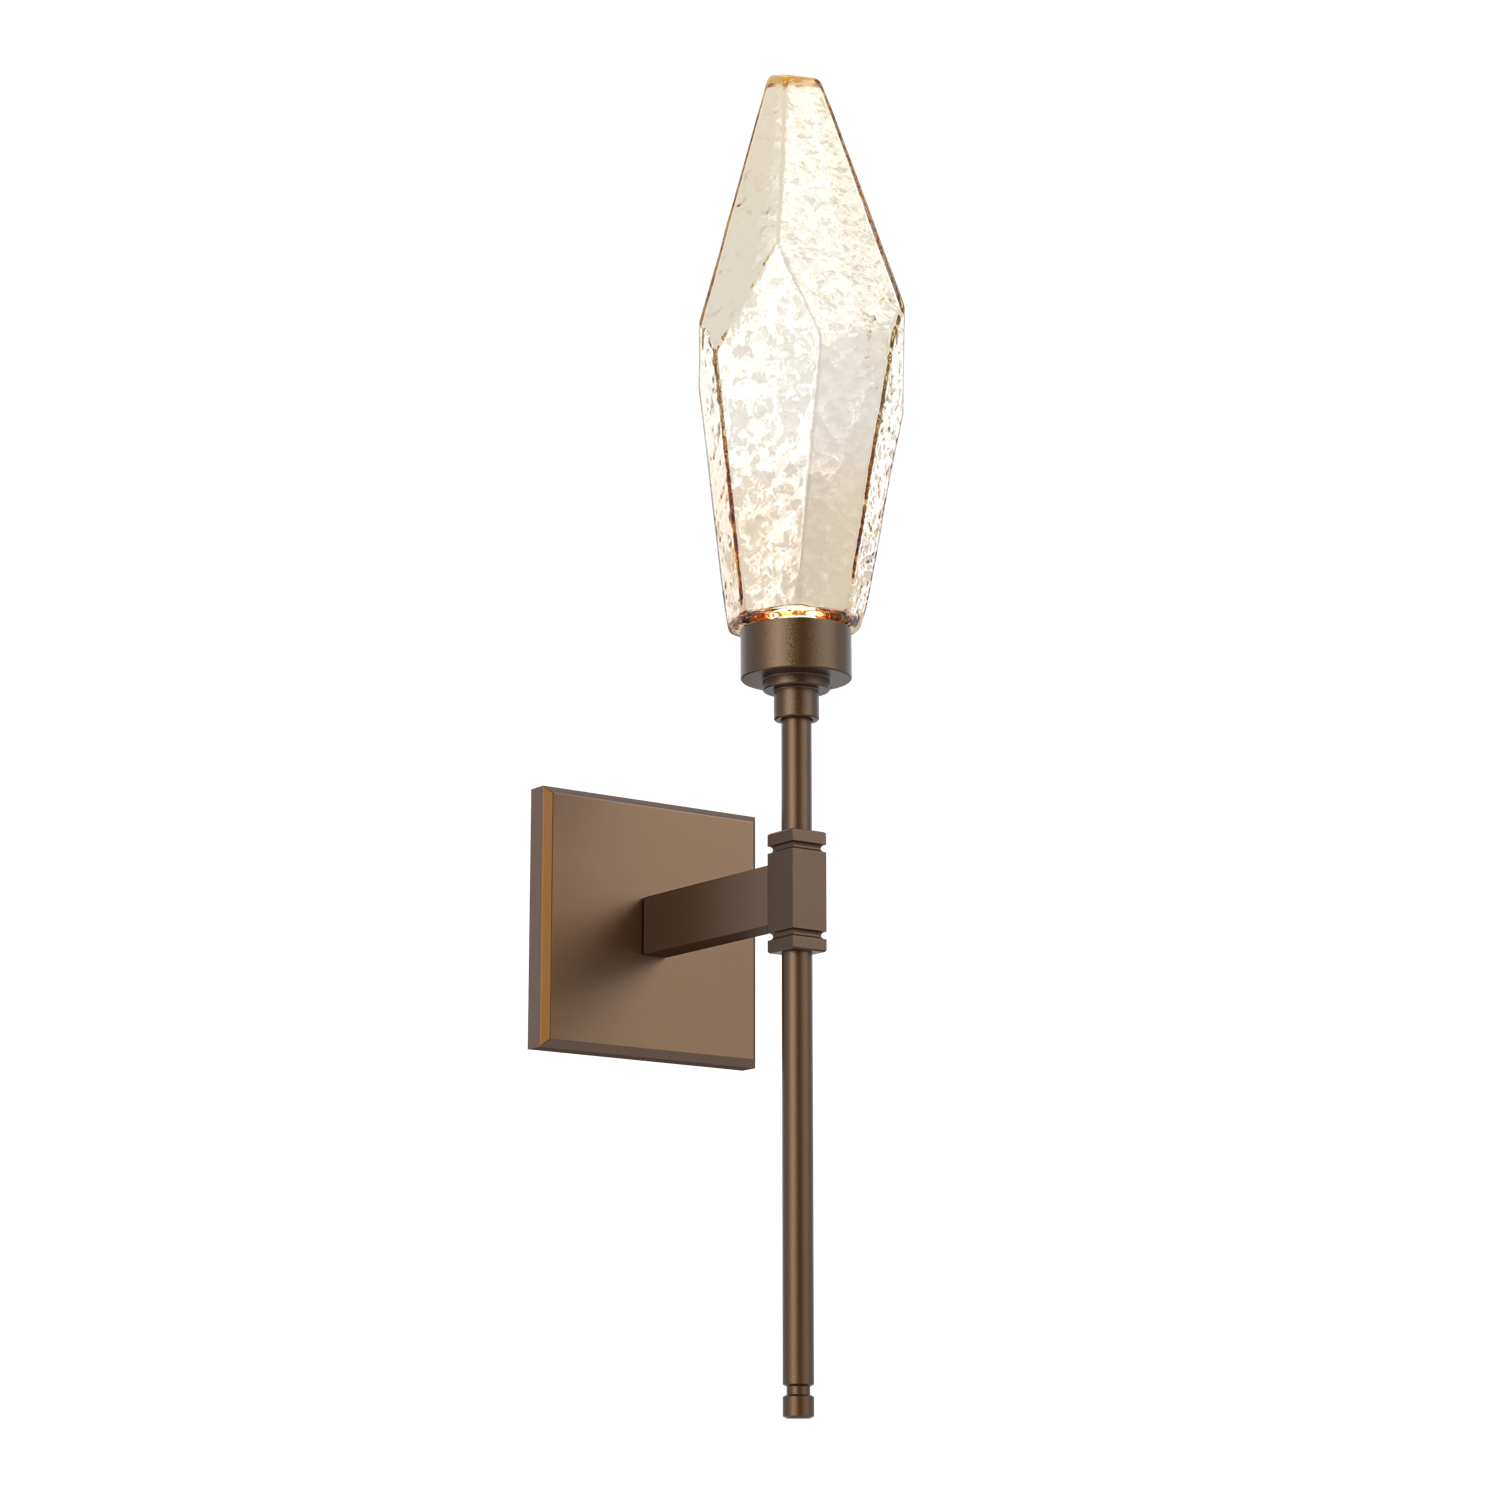 IDB0050-07-FB-CA-Hammerton-Studio-Rock-Crystal-belvedere-wall-sconce-with-flat-bronze-finish-and-chilled-amber-blown-glass-shades-and-LED-lamping